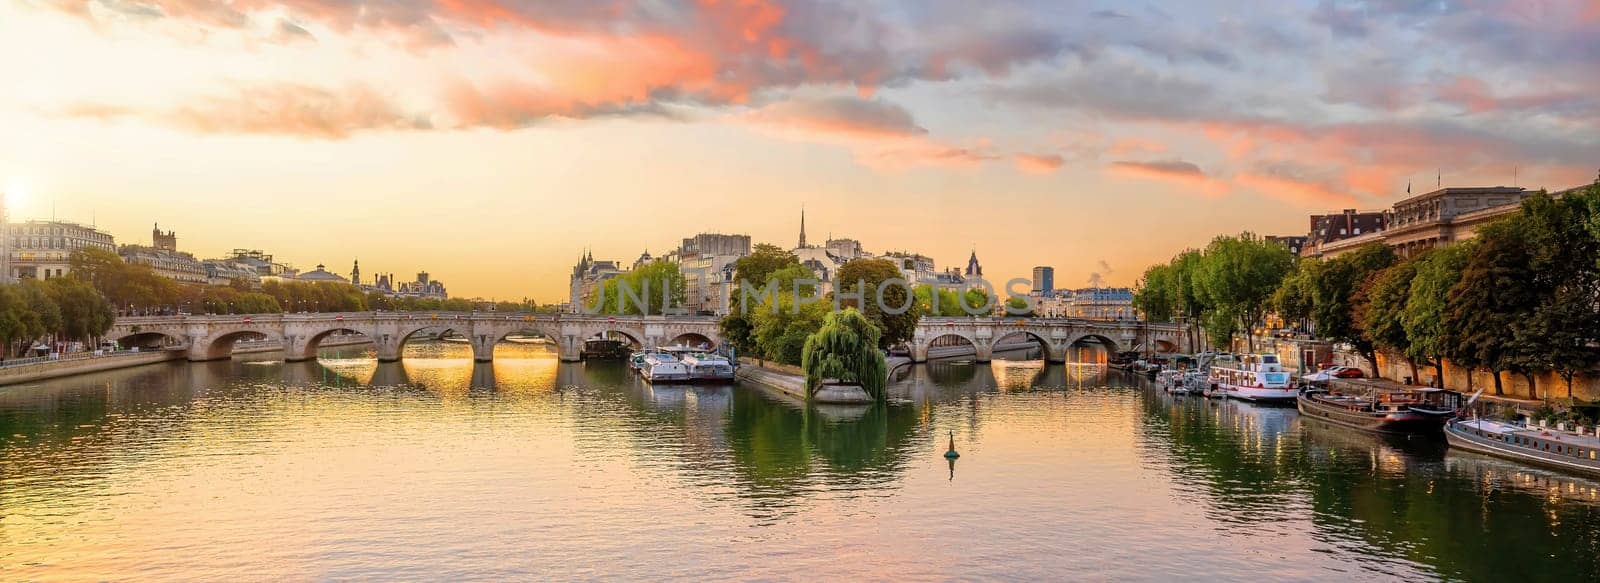 Paris city skyline with Seine river, cityscape of France by f11photo